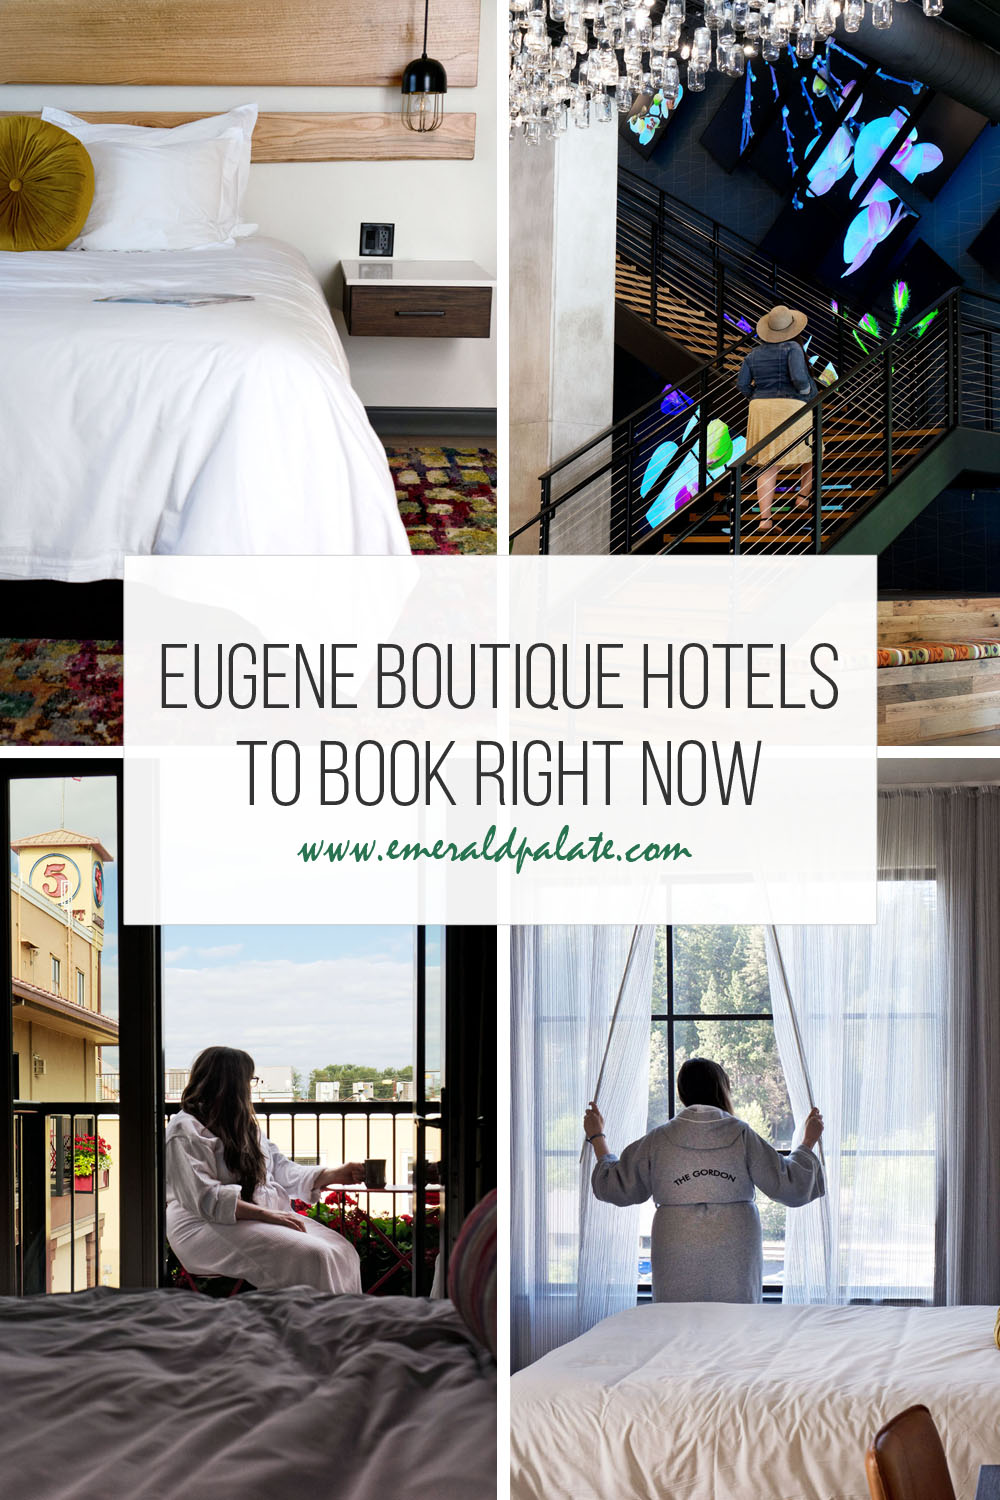 Boutique hotels in Eugene, Oregon to book right now. If you are wondering were to stay in Eugene, Oregon, make it one of these luxury hotels right in 5th Street Public Market. It's the perfect place to stay if you want nice accommodations in the center of downtown Eugene and all its attractions!